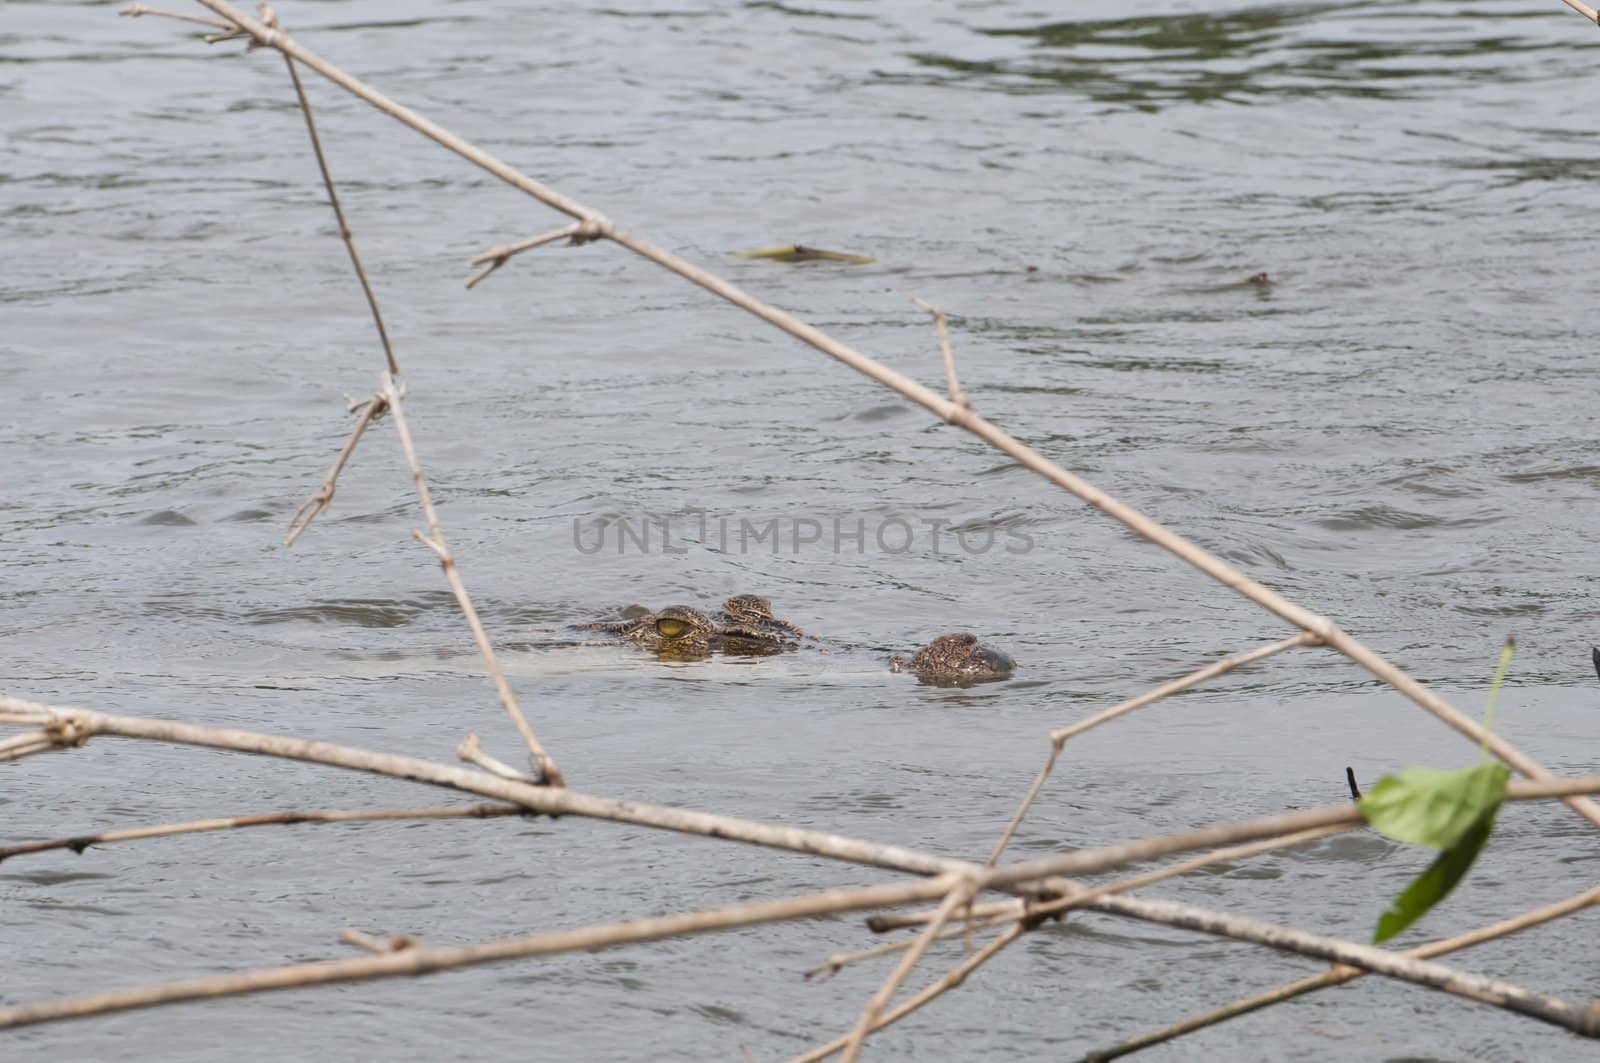 Wild Asian crocodile in a river with branches in the foreground.